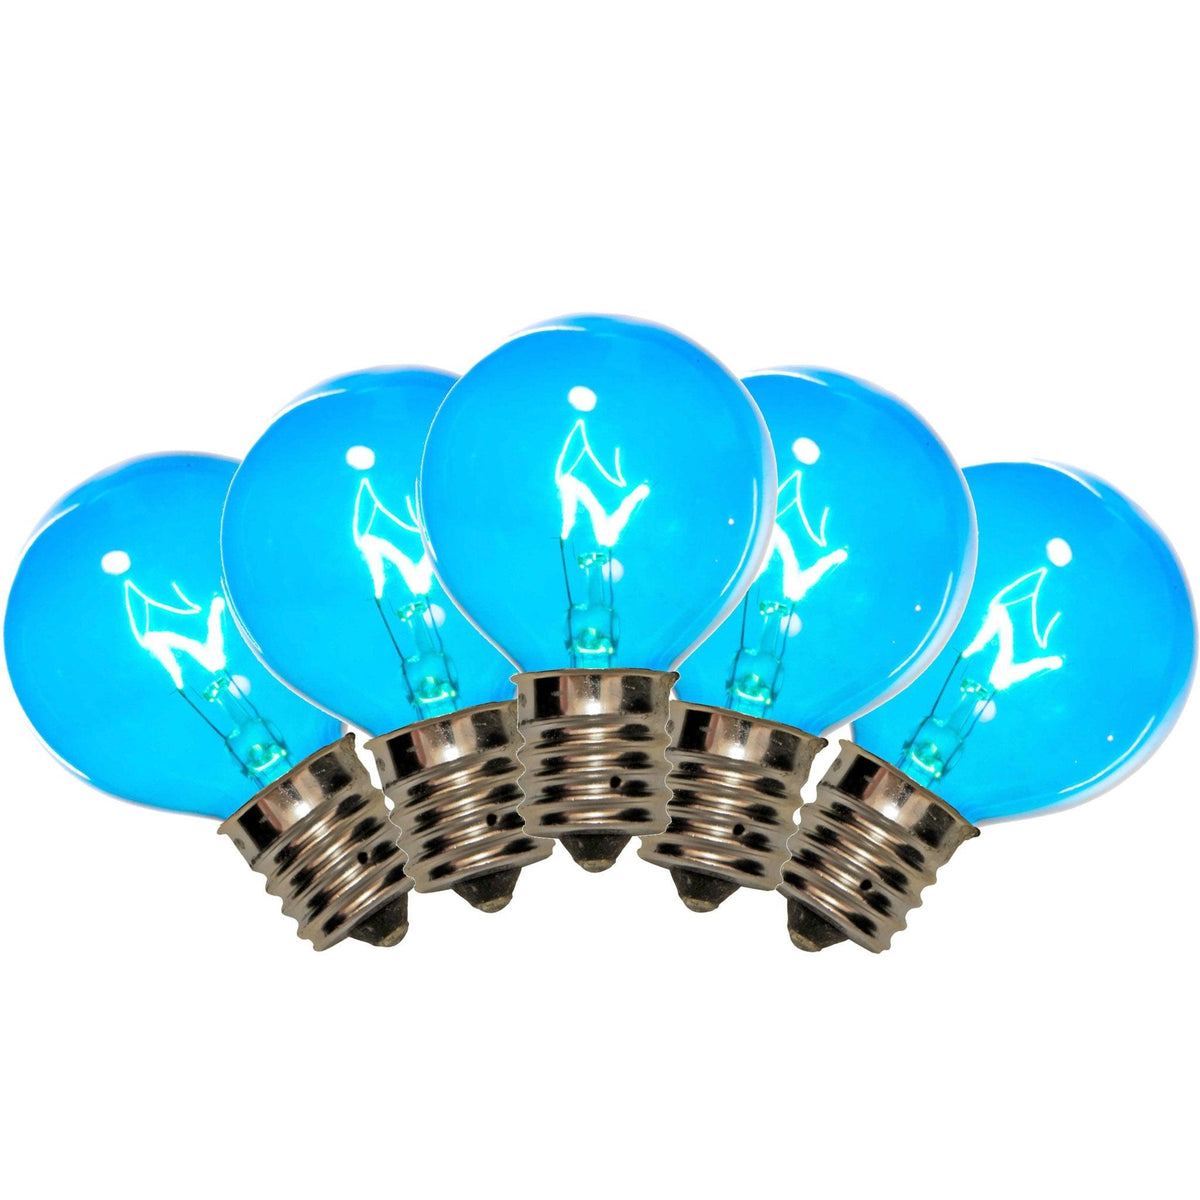 1 Box of 25 of brand new transparent Blue G40 Globe Light Bulbs Replace your old bulbs today at leedisplay.com